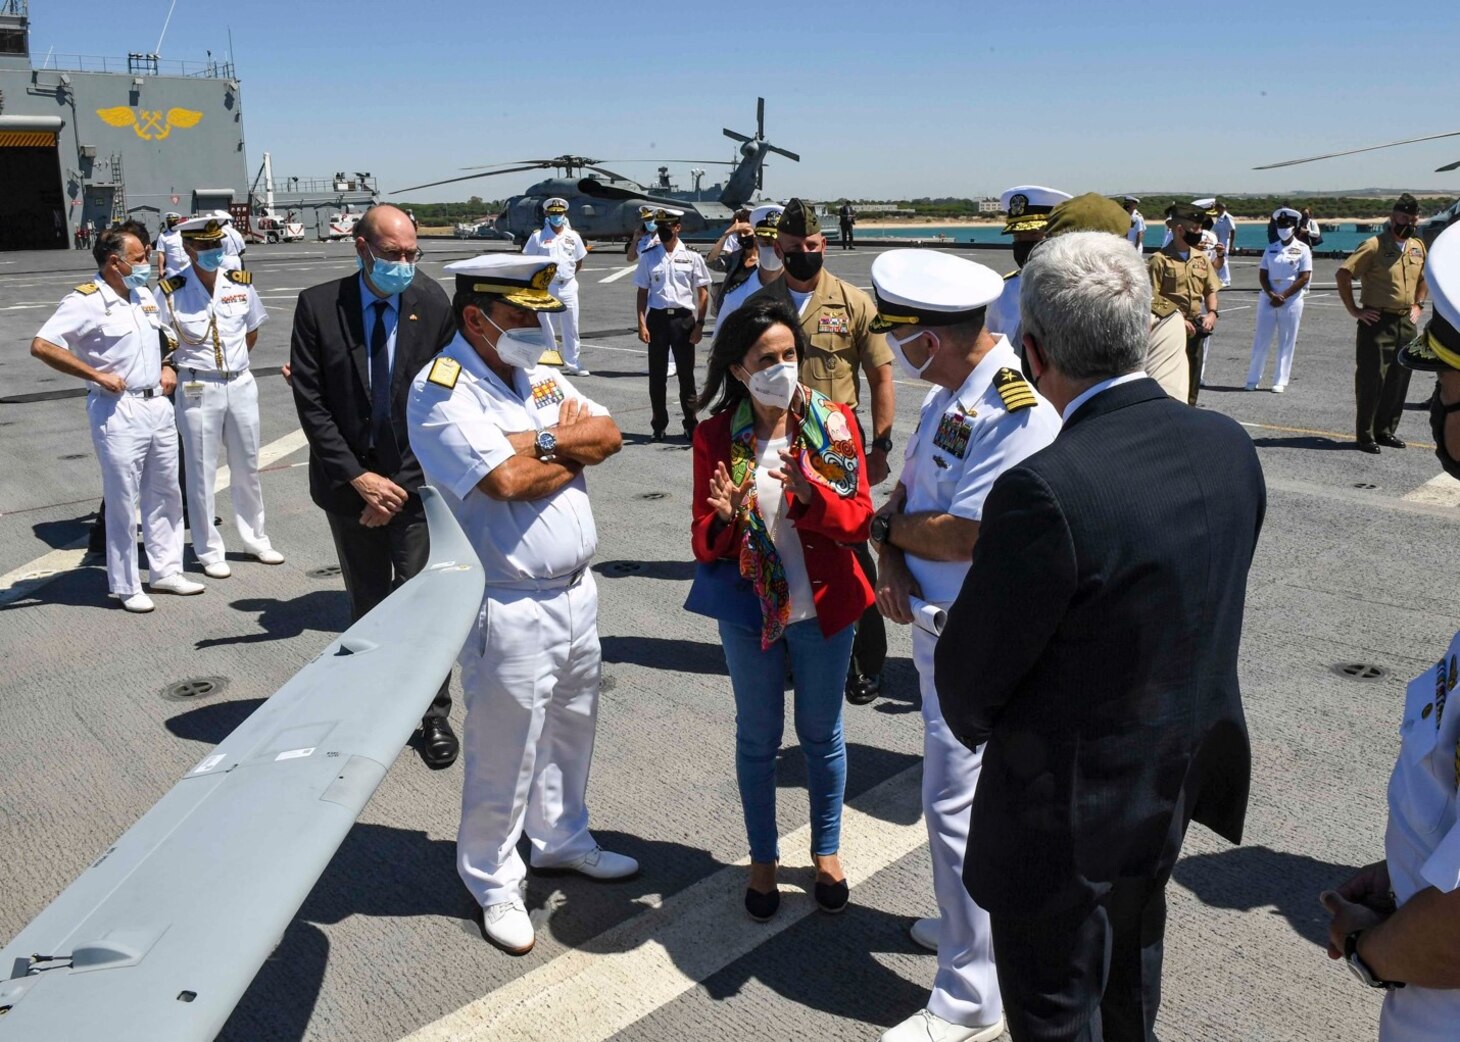 (July 8, 2021) Spanish Minister of Defense Margarita Robles, center, speaks with Capt. Michael Concannon, commanding officer, right, about the ship’s flight deck capabilities during a tour aboard the Expeditionary Sea Base USS Hershel “Woody” Williams (ESB 4) in the Atlantic Ocean, July 8, 2021. Hershel “Woody” Williams is on a scheduled deployment in the U.S. Sixth Fleet area of operations in support of U.S. national interests and security in Europe and Africa.